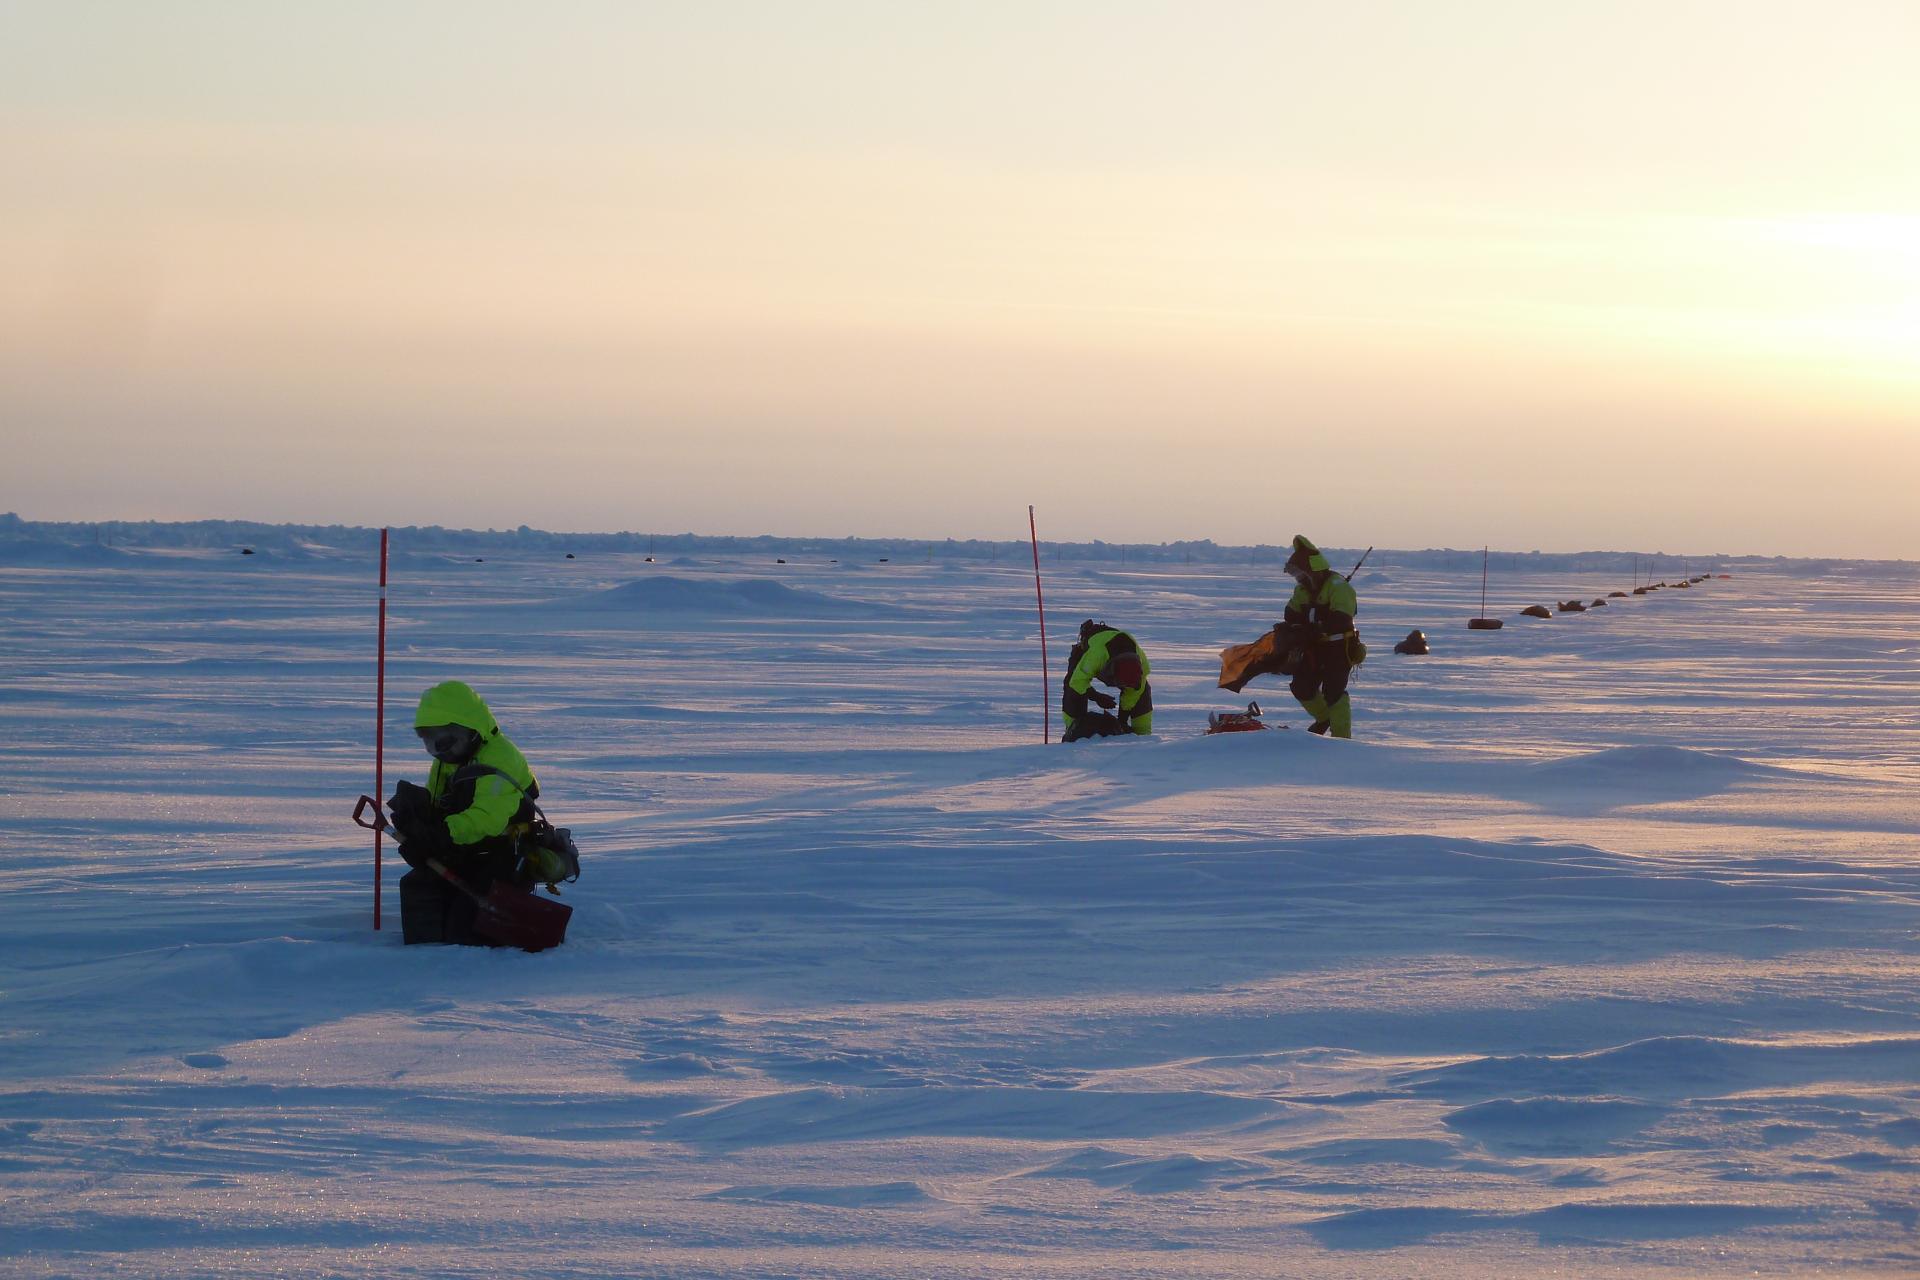 The overflight field, located on a large sea ice floe, is marked with dark plastic bags and orange poles.